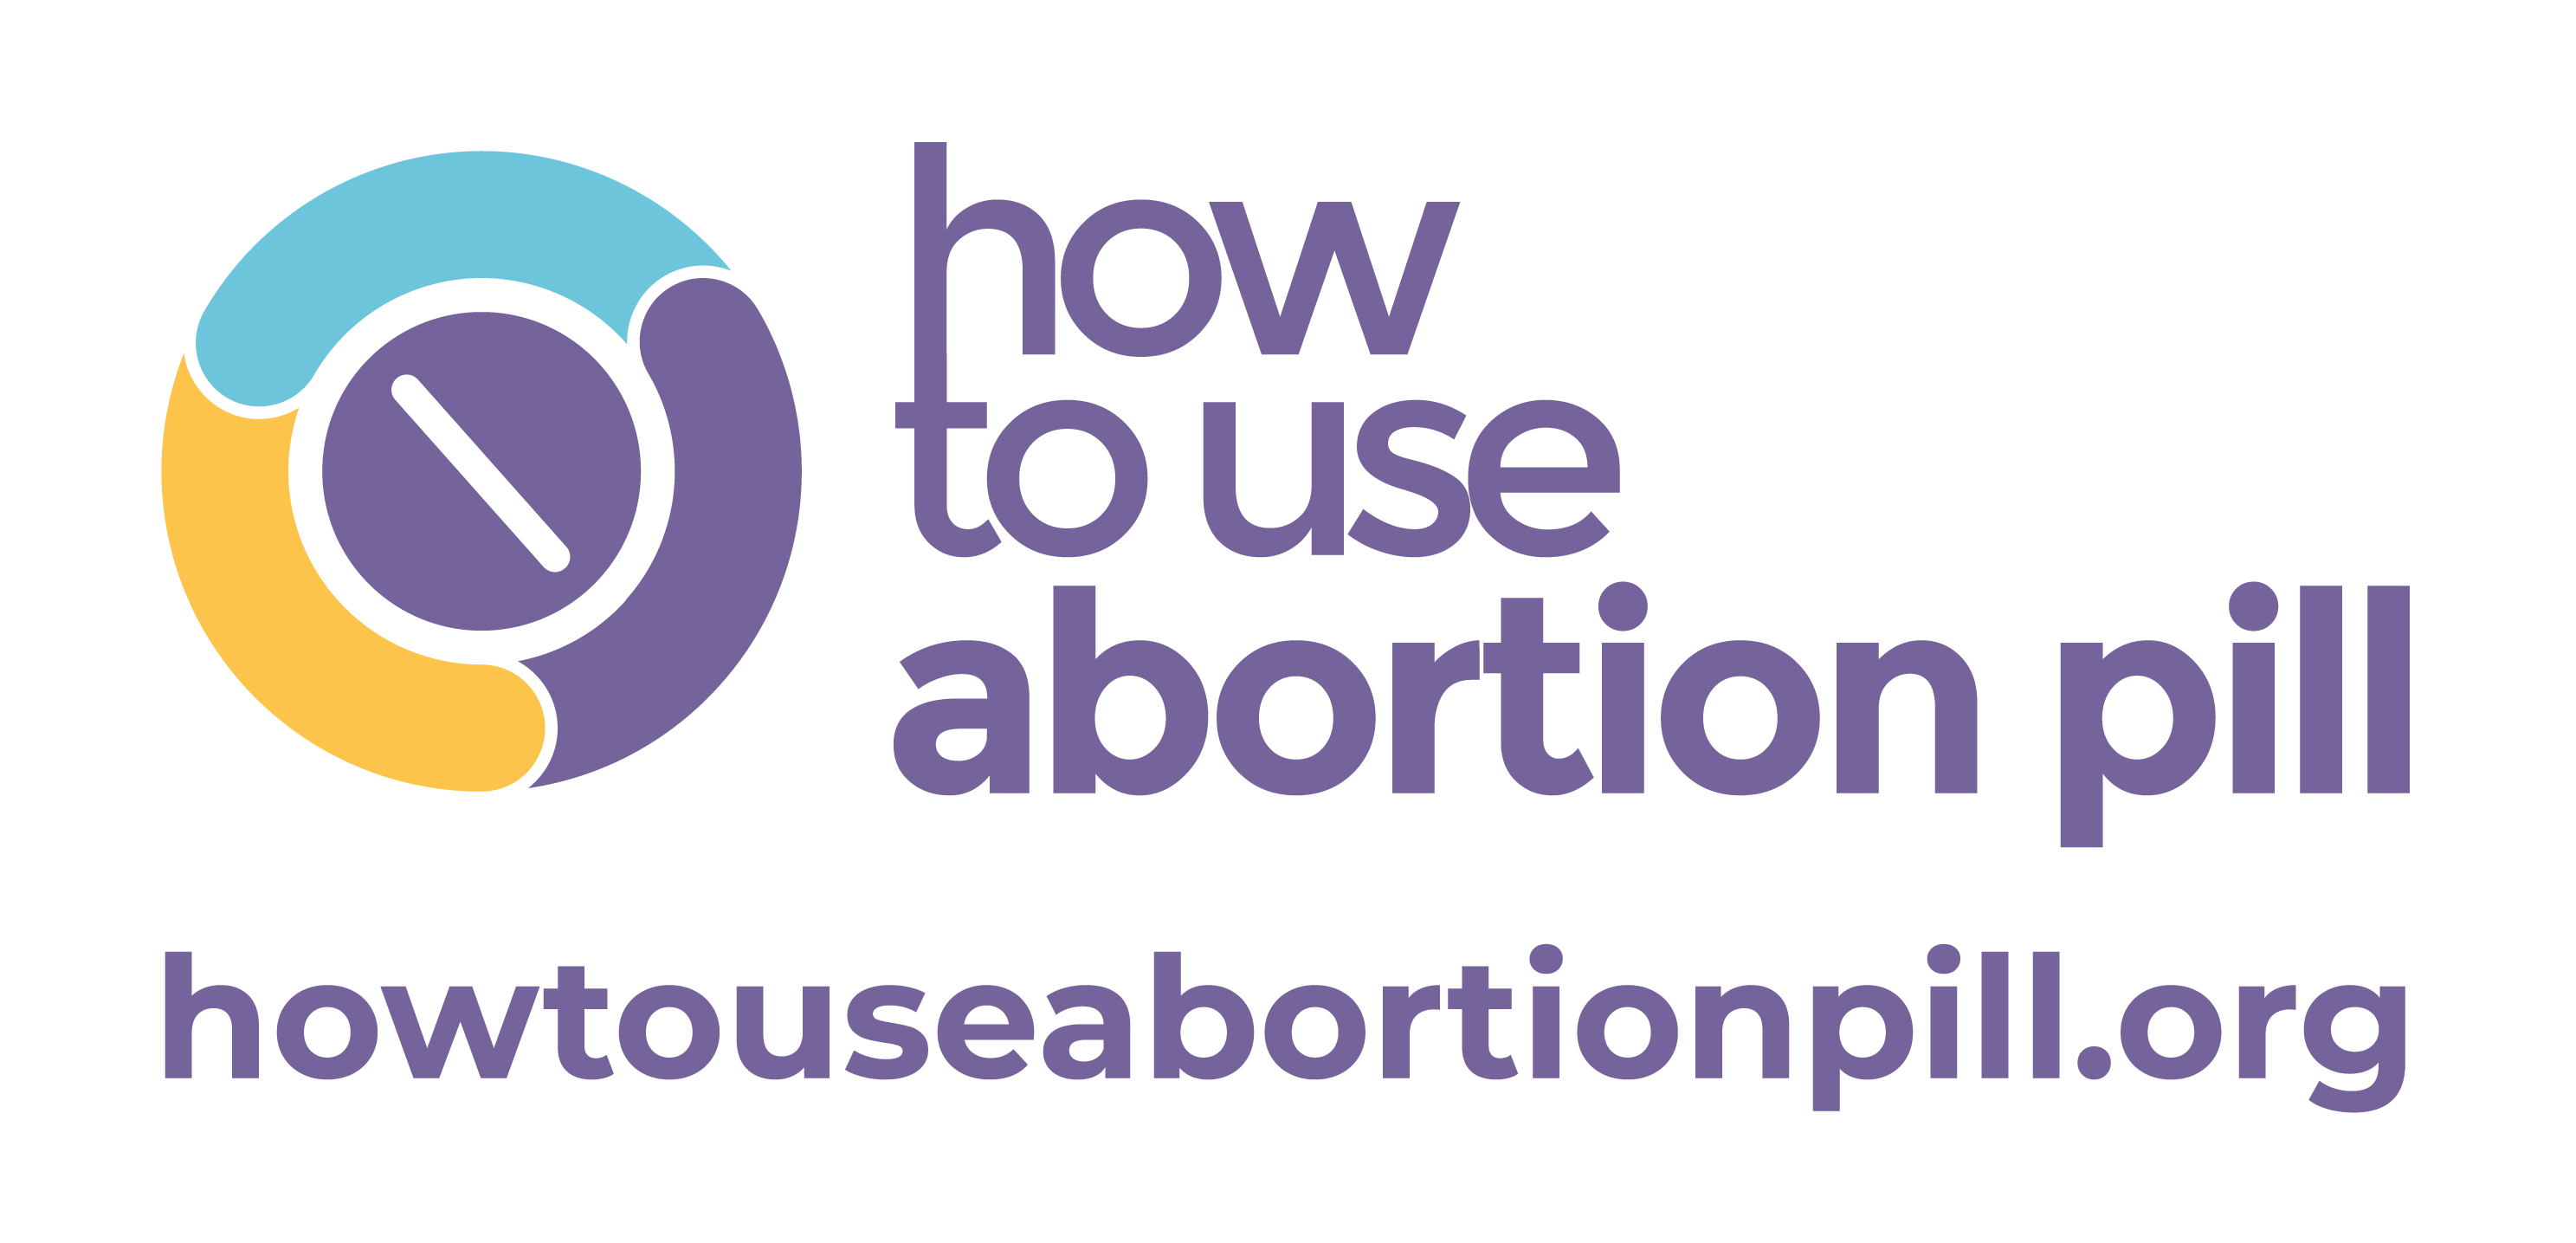 How to use abortion pill logo